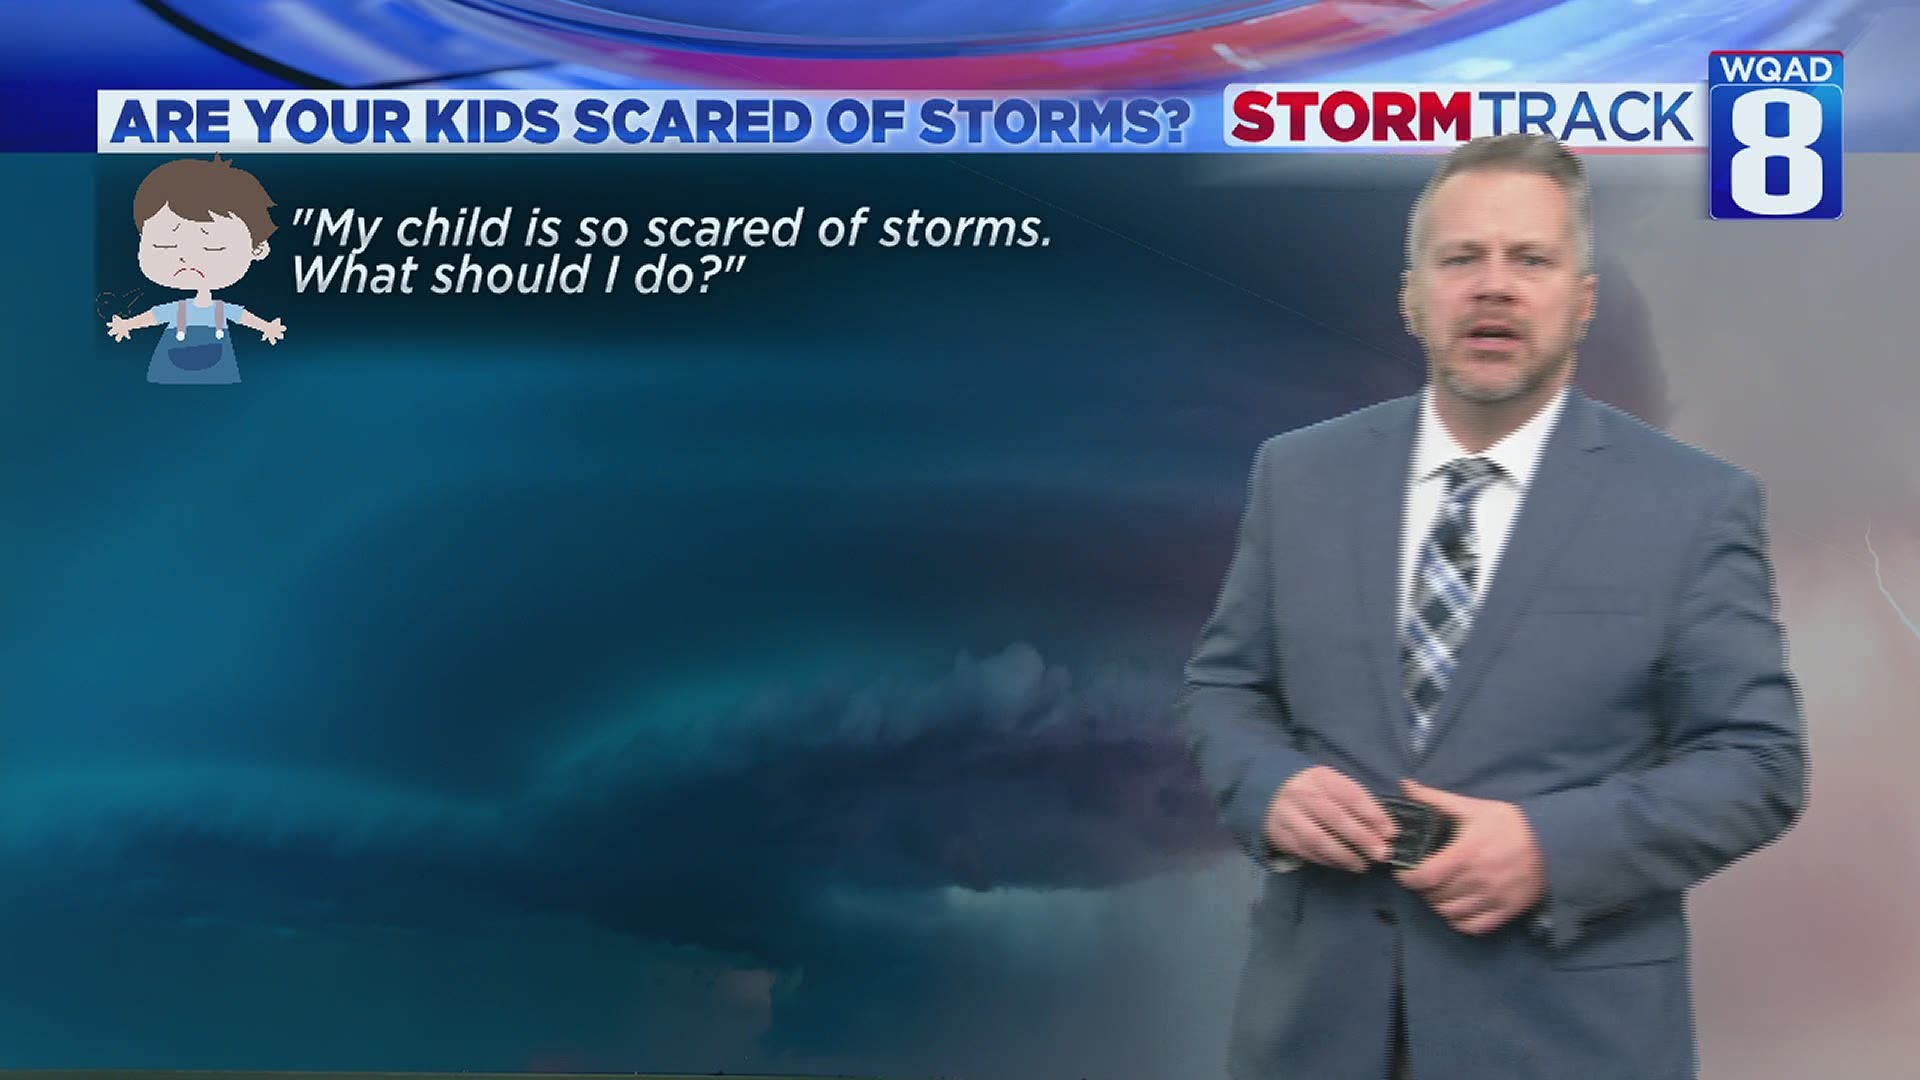 "My child is so scared of storms. What should I do?"